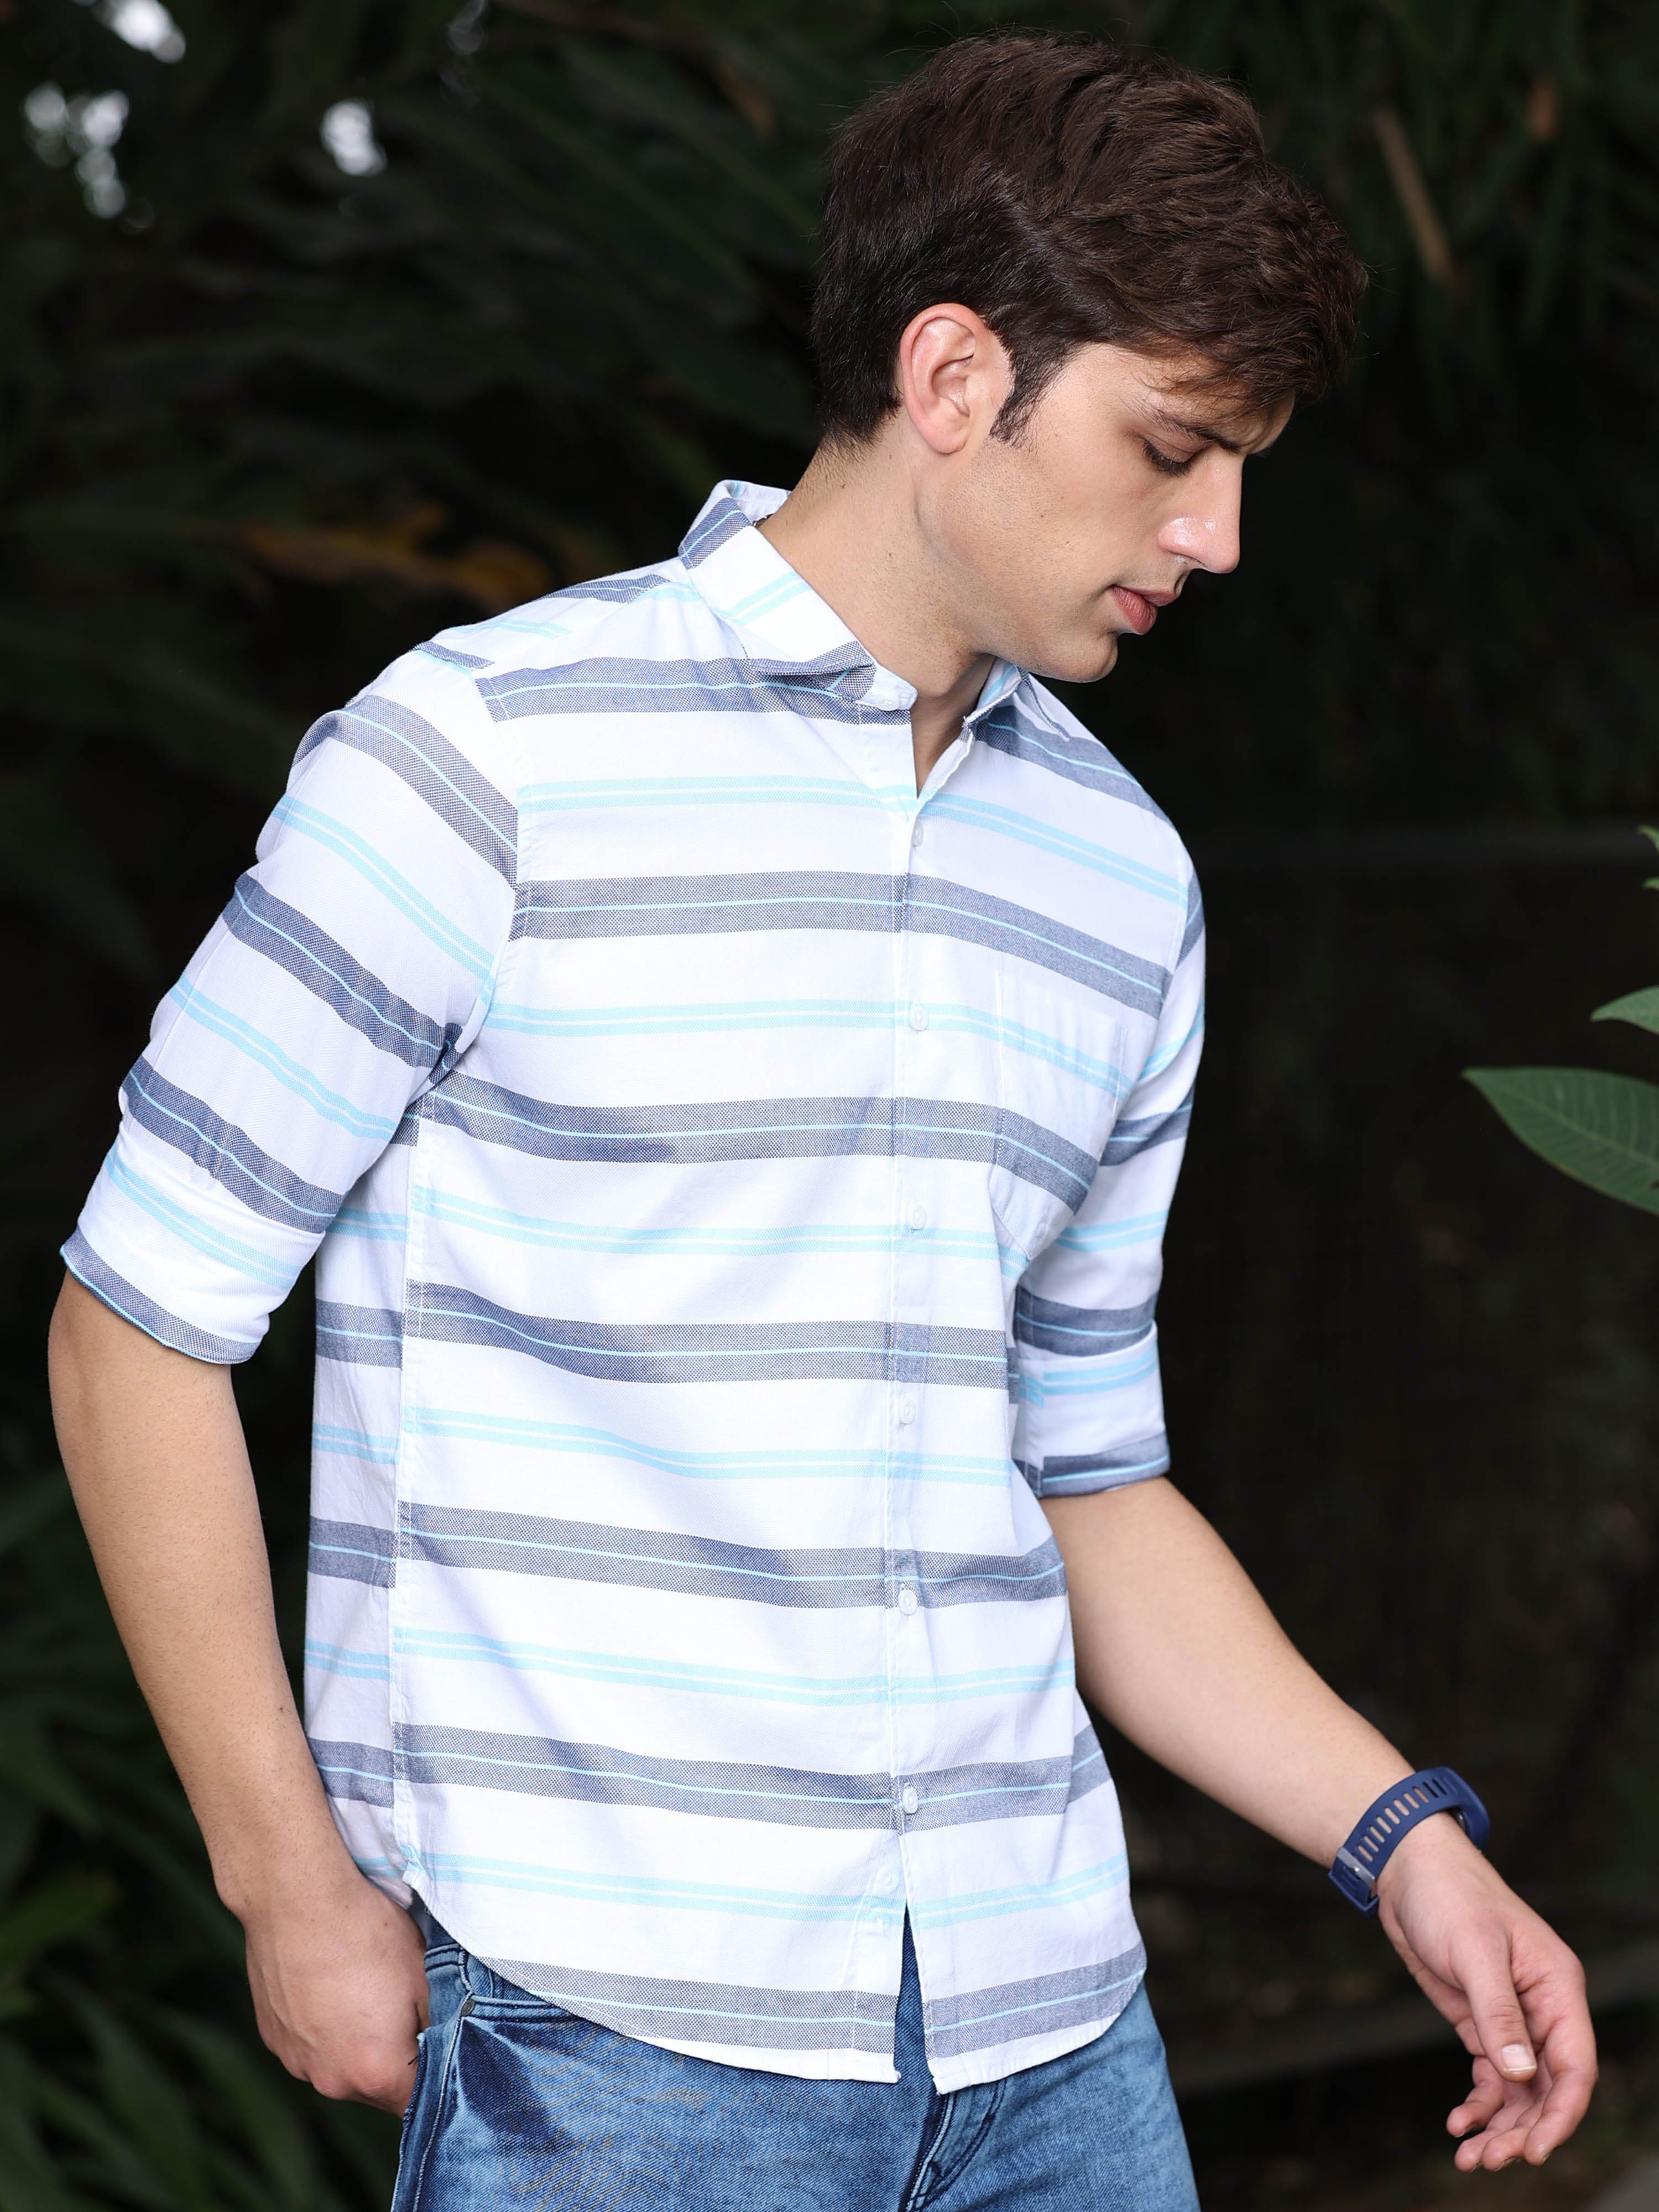 Buy Stylish Premium Broad Men's Striped Casual Shirt OnlineRs. 1399.00